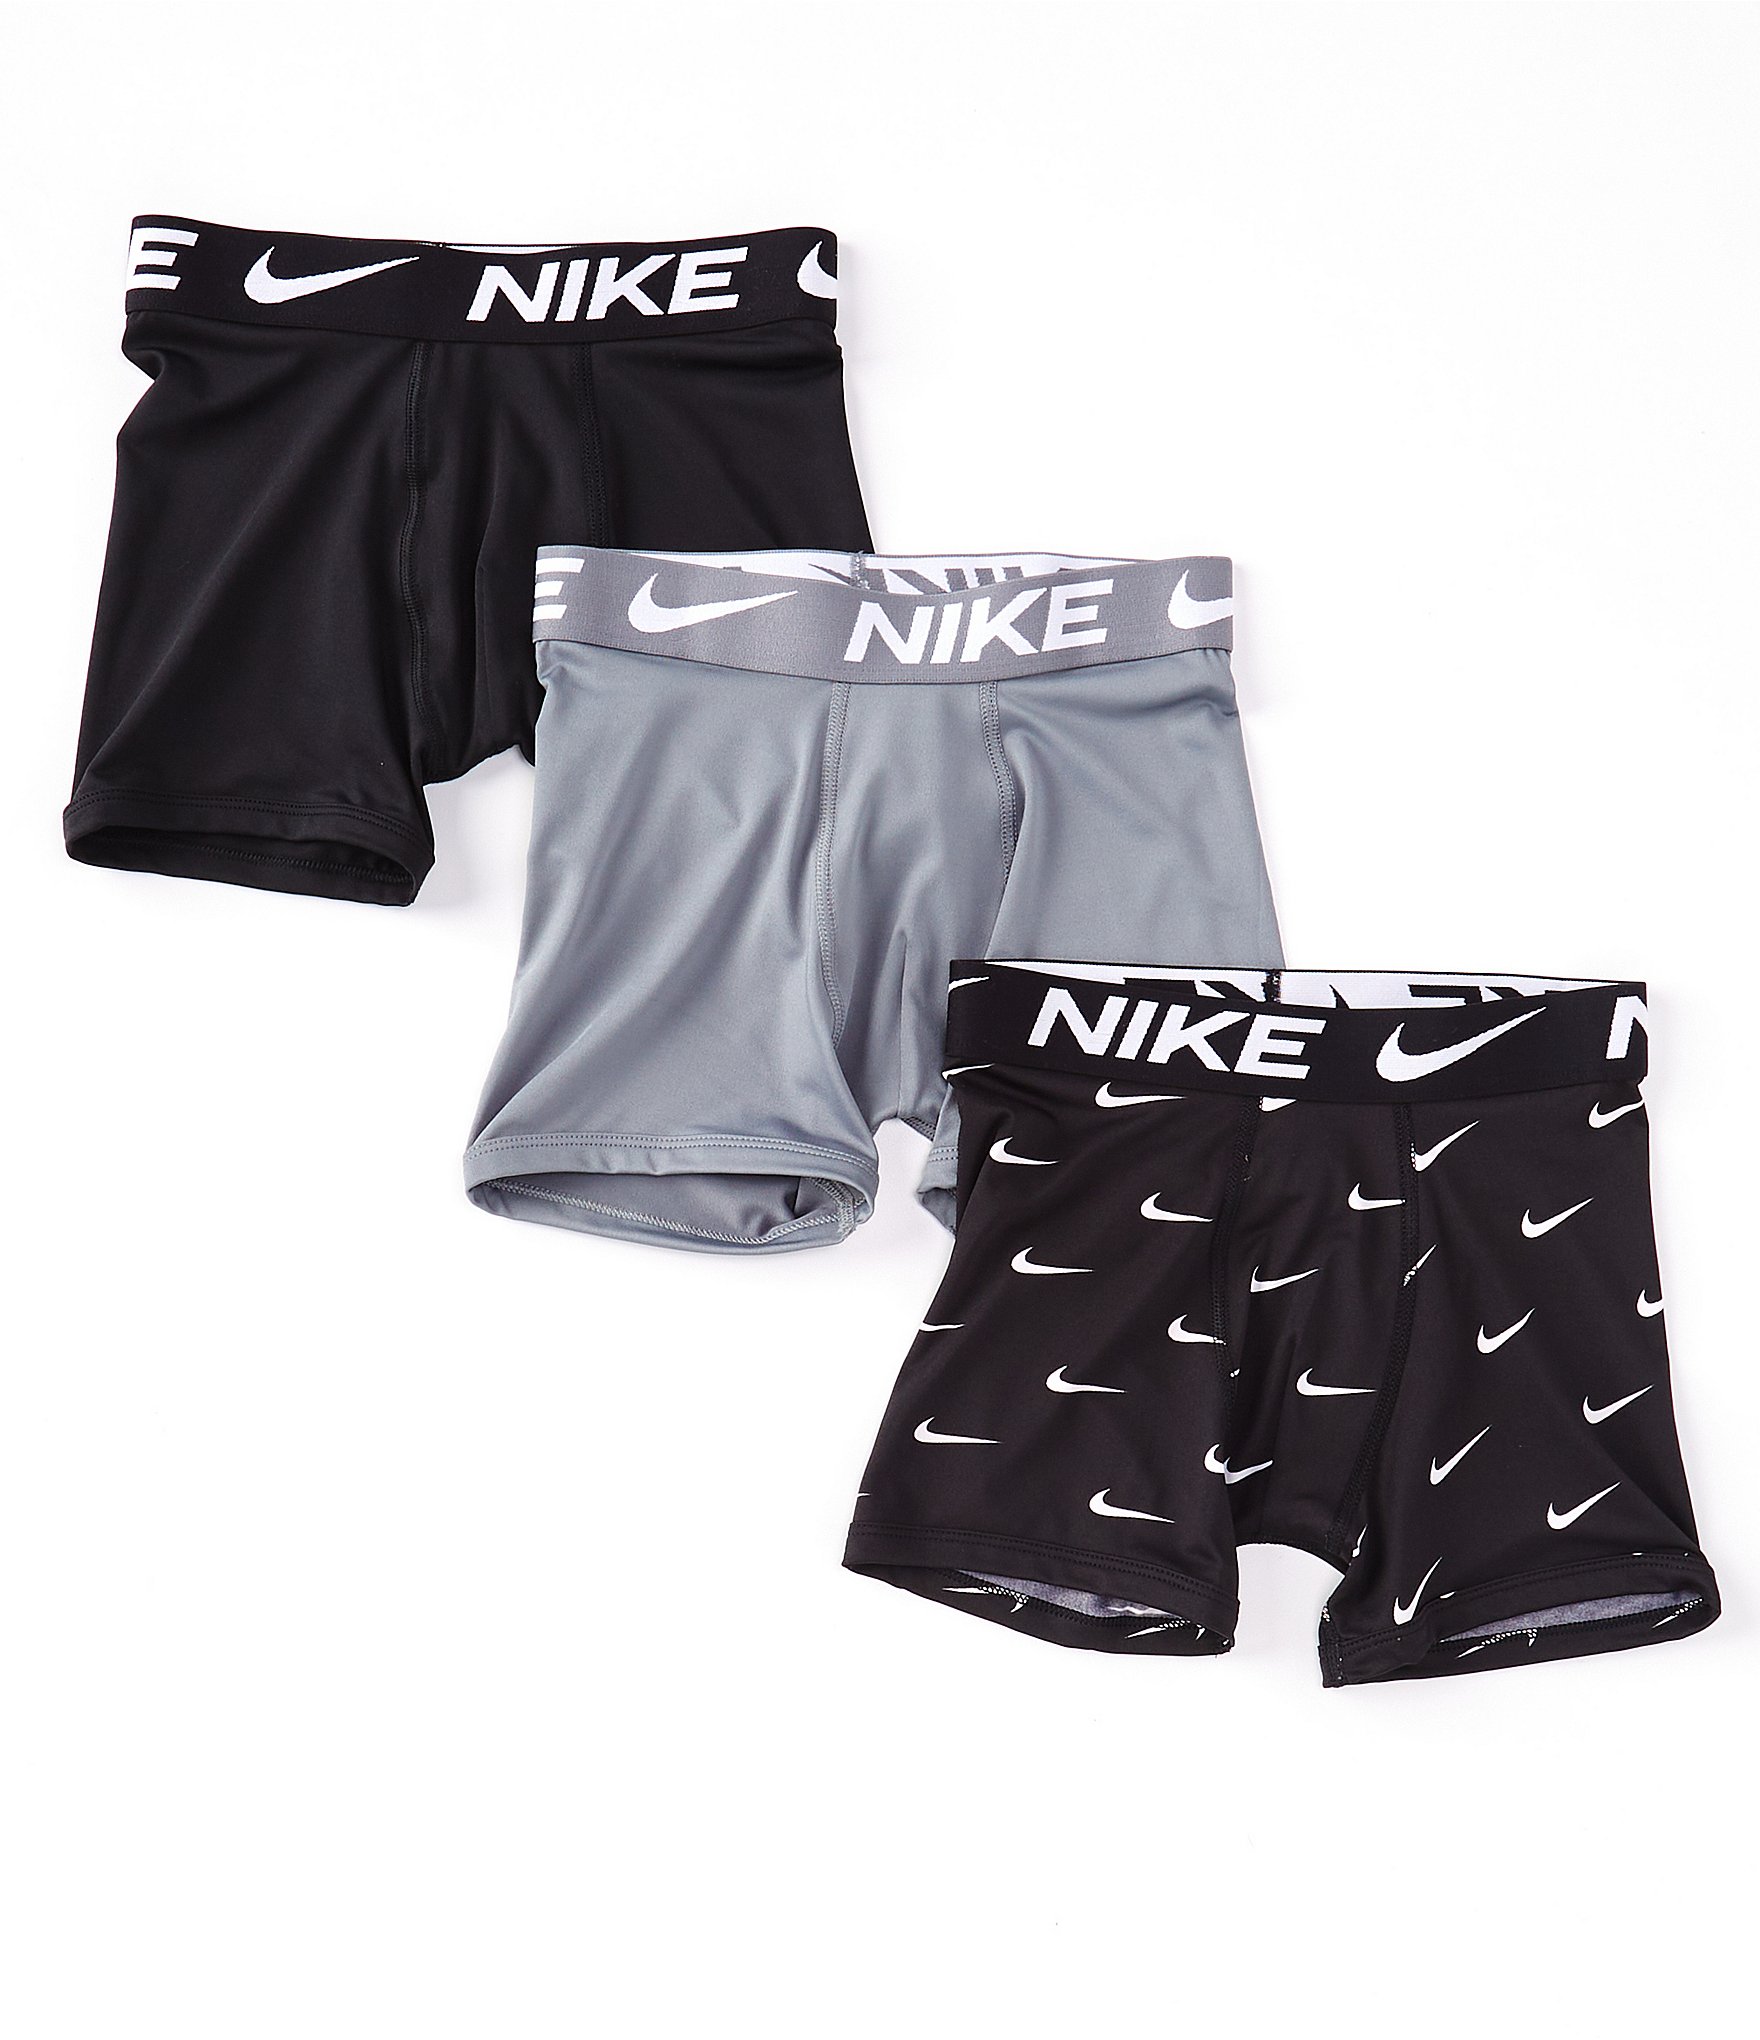 Nike Big Boys Essential Dri-FIT Boxer Briefs, Pack of 3 - Gray, Black - Size Small